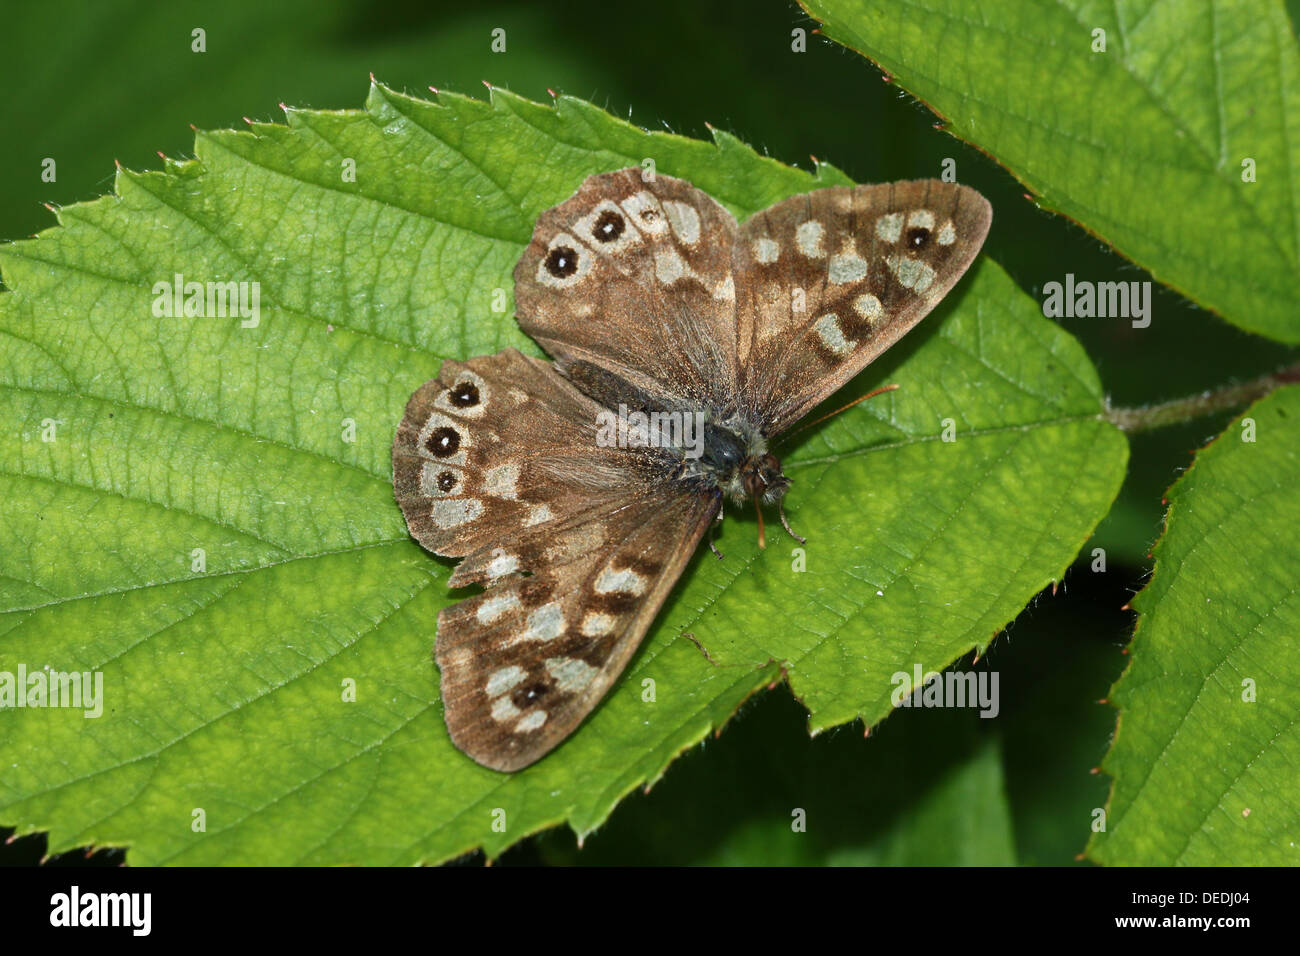 European  Speckled Wood butterfly  (Pararge aegeria) posing on  a leaf Stock Photo